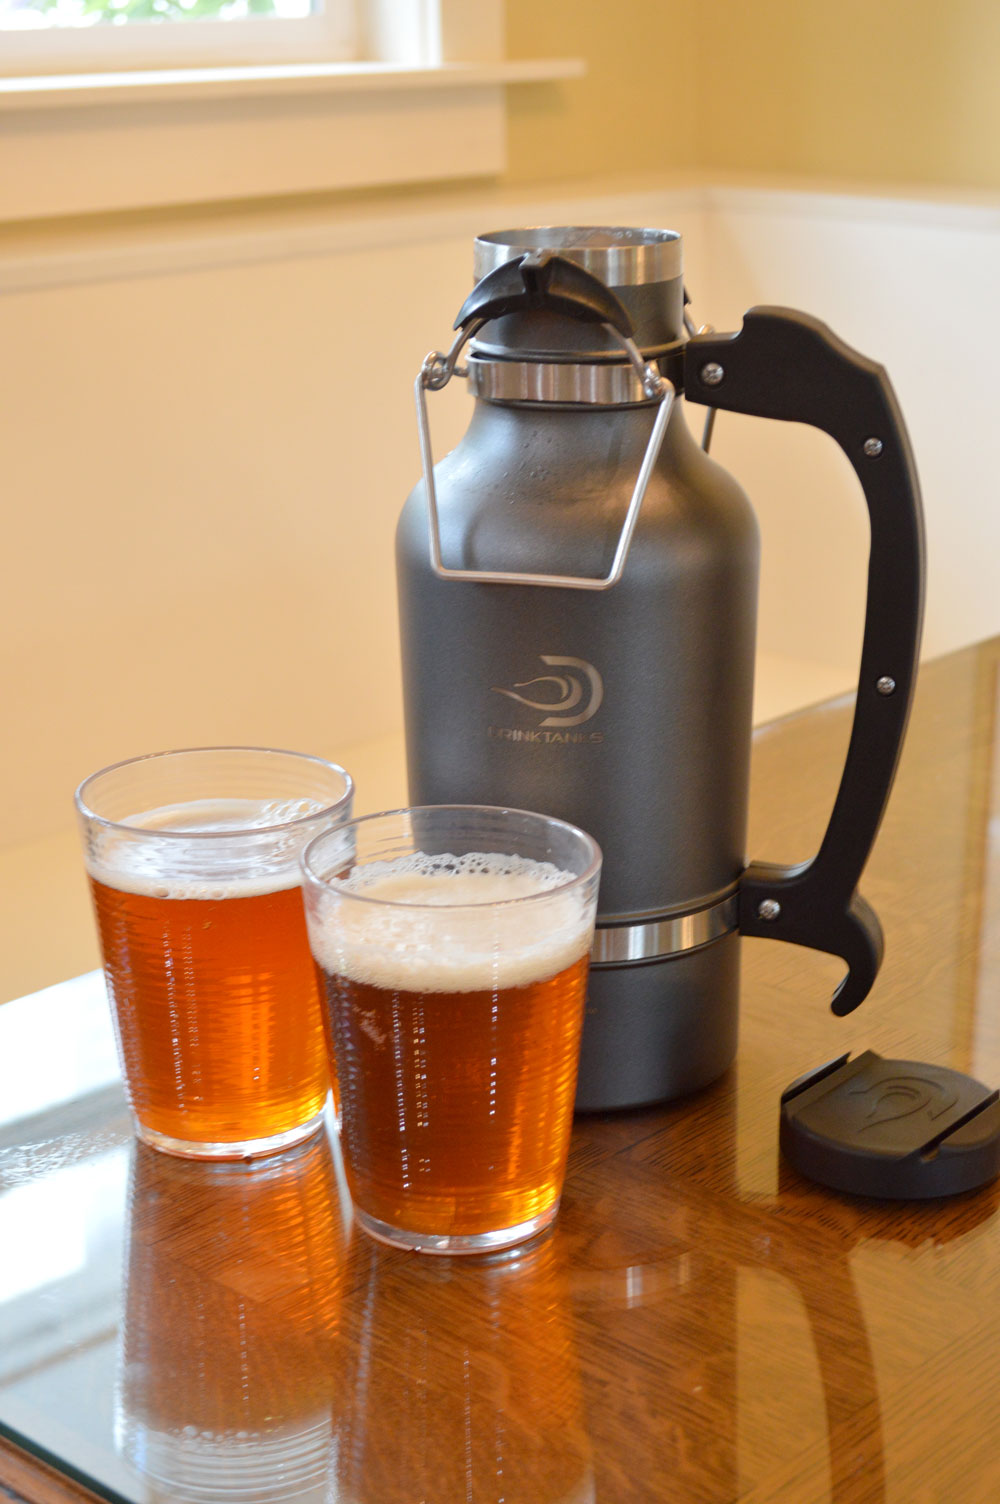 DrinkTanks Personal Growler is carbonation friendly - Mommy Scene review